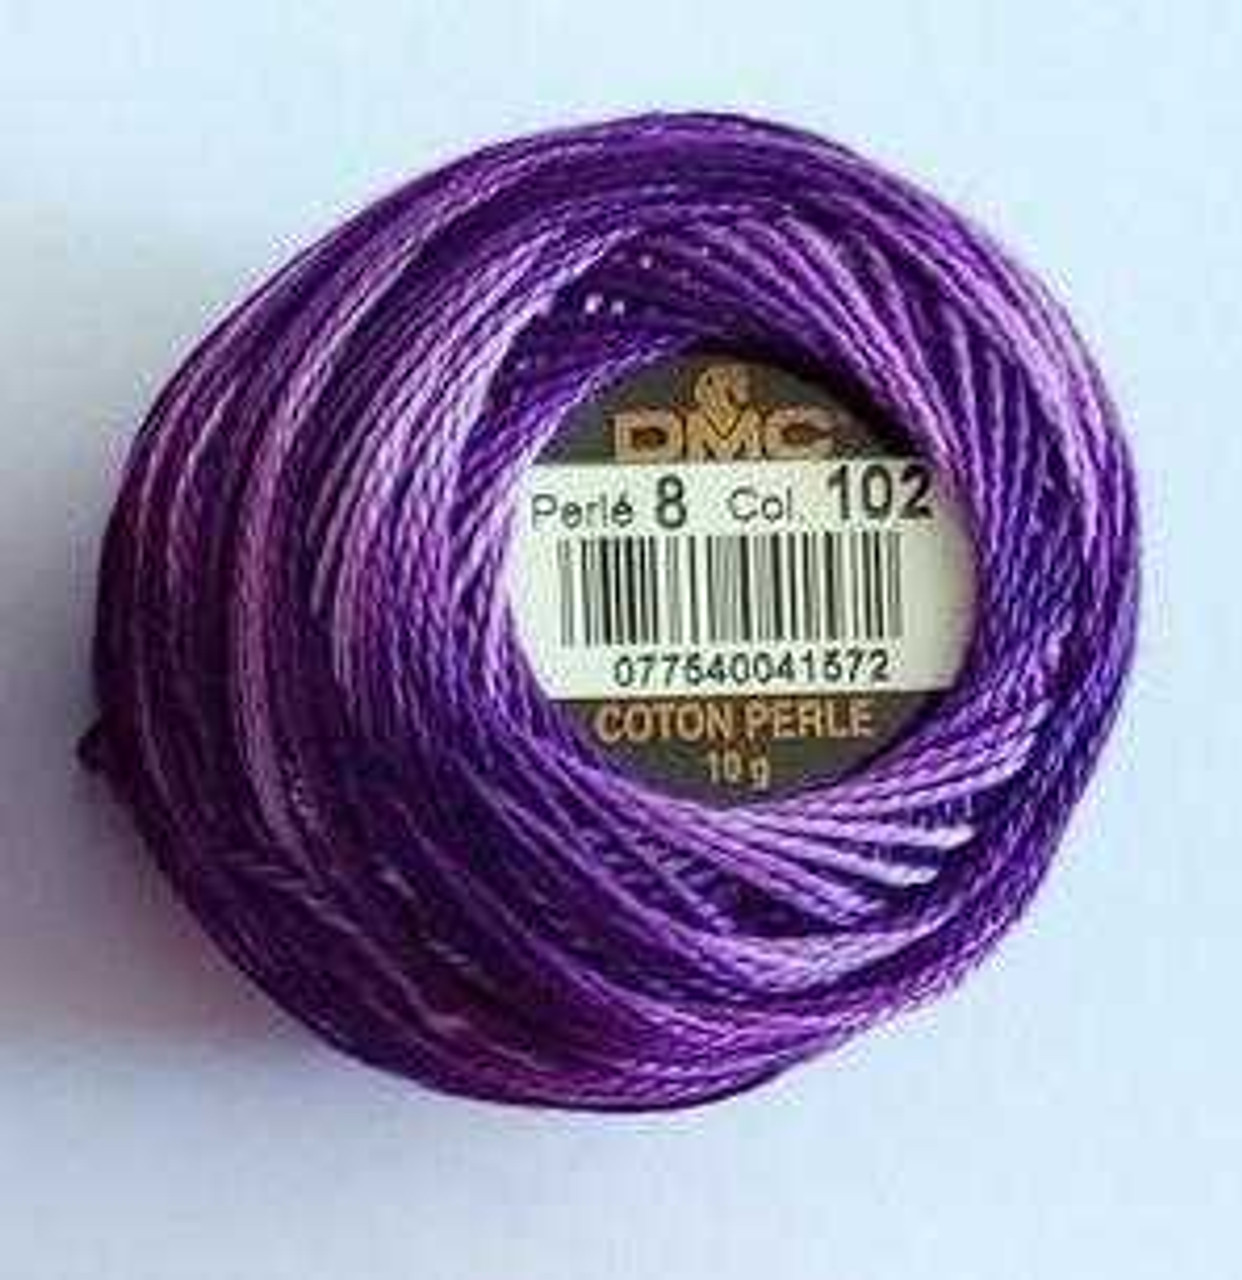 Variegated Embroidery Floss, Sewing Notions